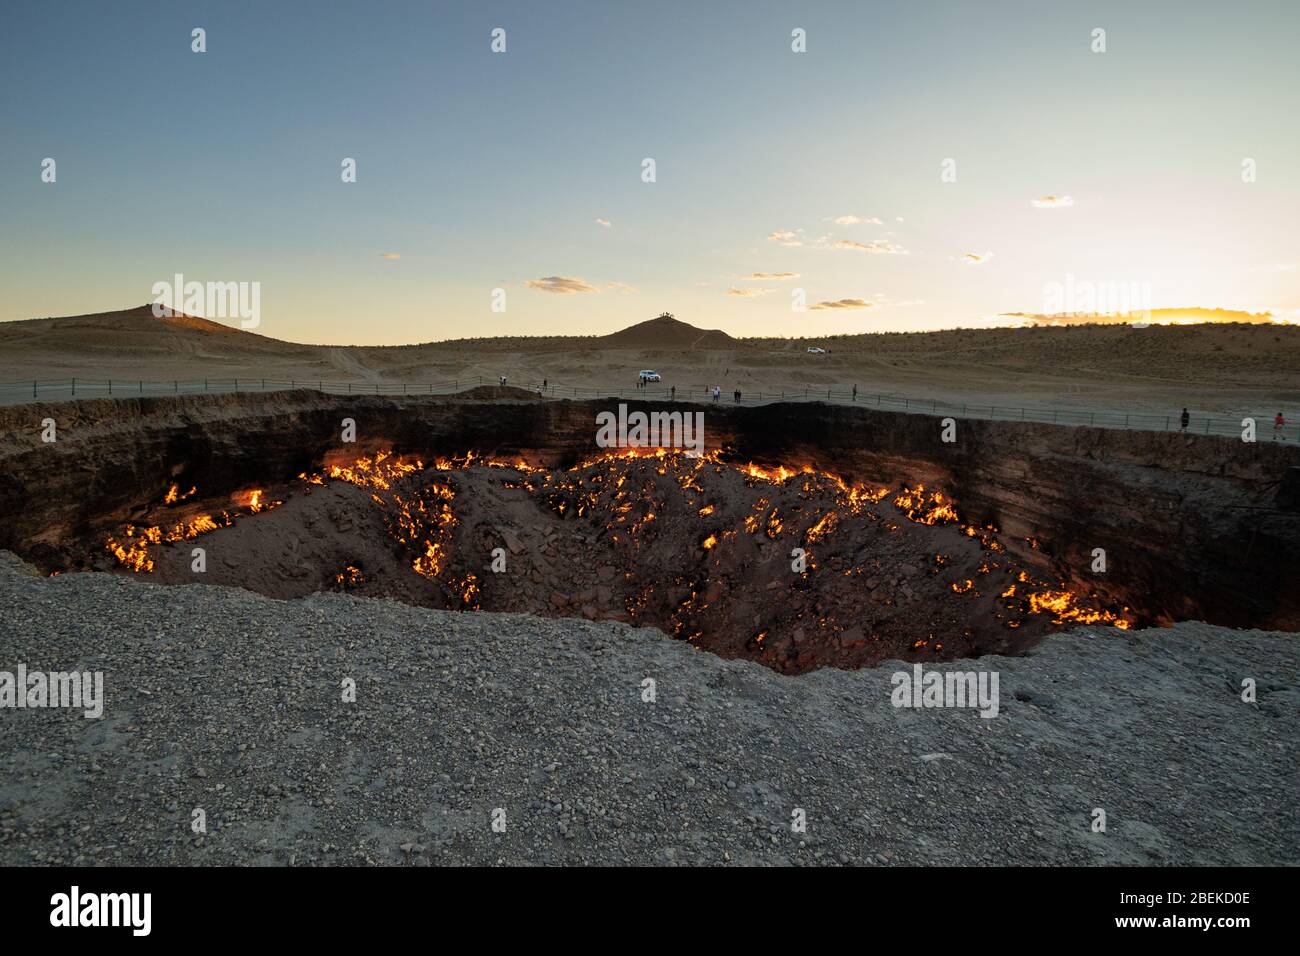 Sunset at the Darvasa Crater, also known as the Doorway to Hell, the flaming gas crater in Darvaza (Darvasa), Turkmenistan Stock Photo